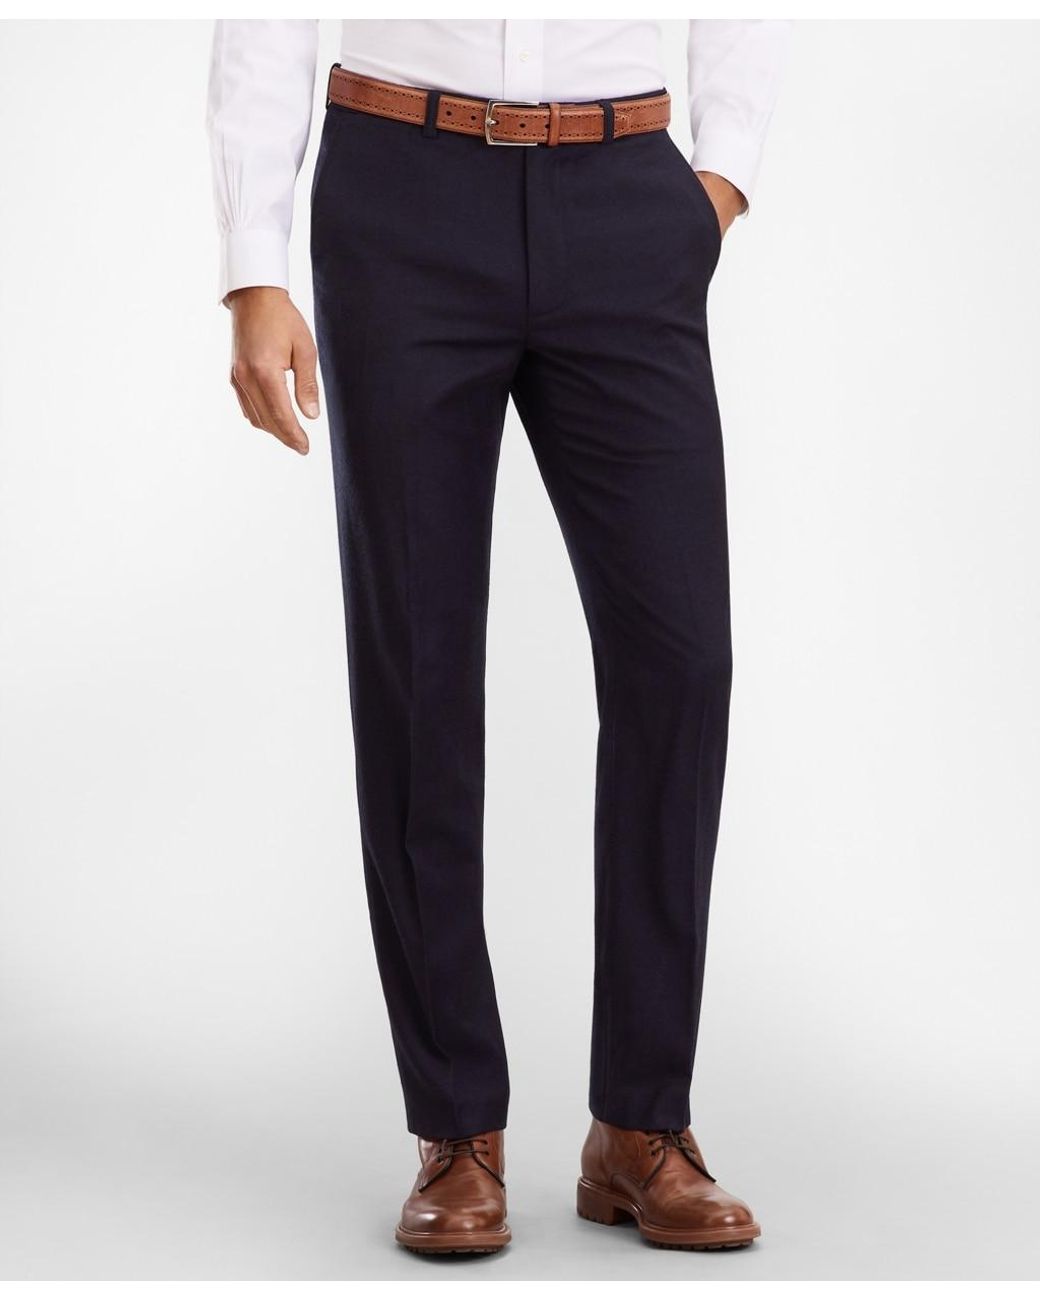 Brooks Brothers Clark Fit Washable Wool Pants in Navy (Blue) for Men - Lyst